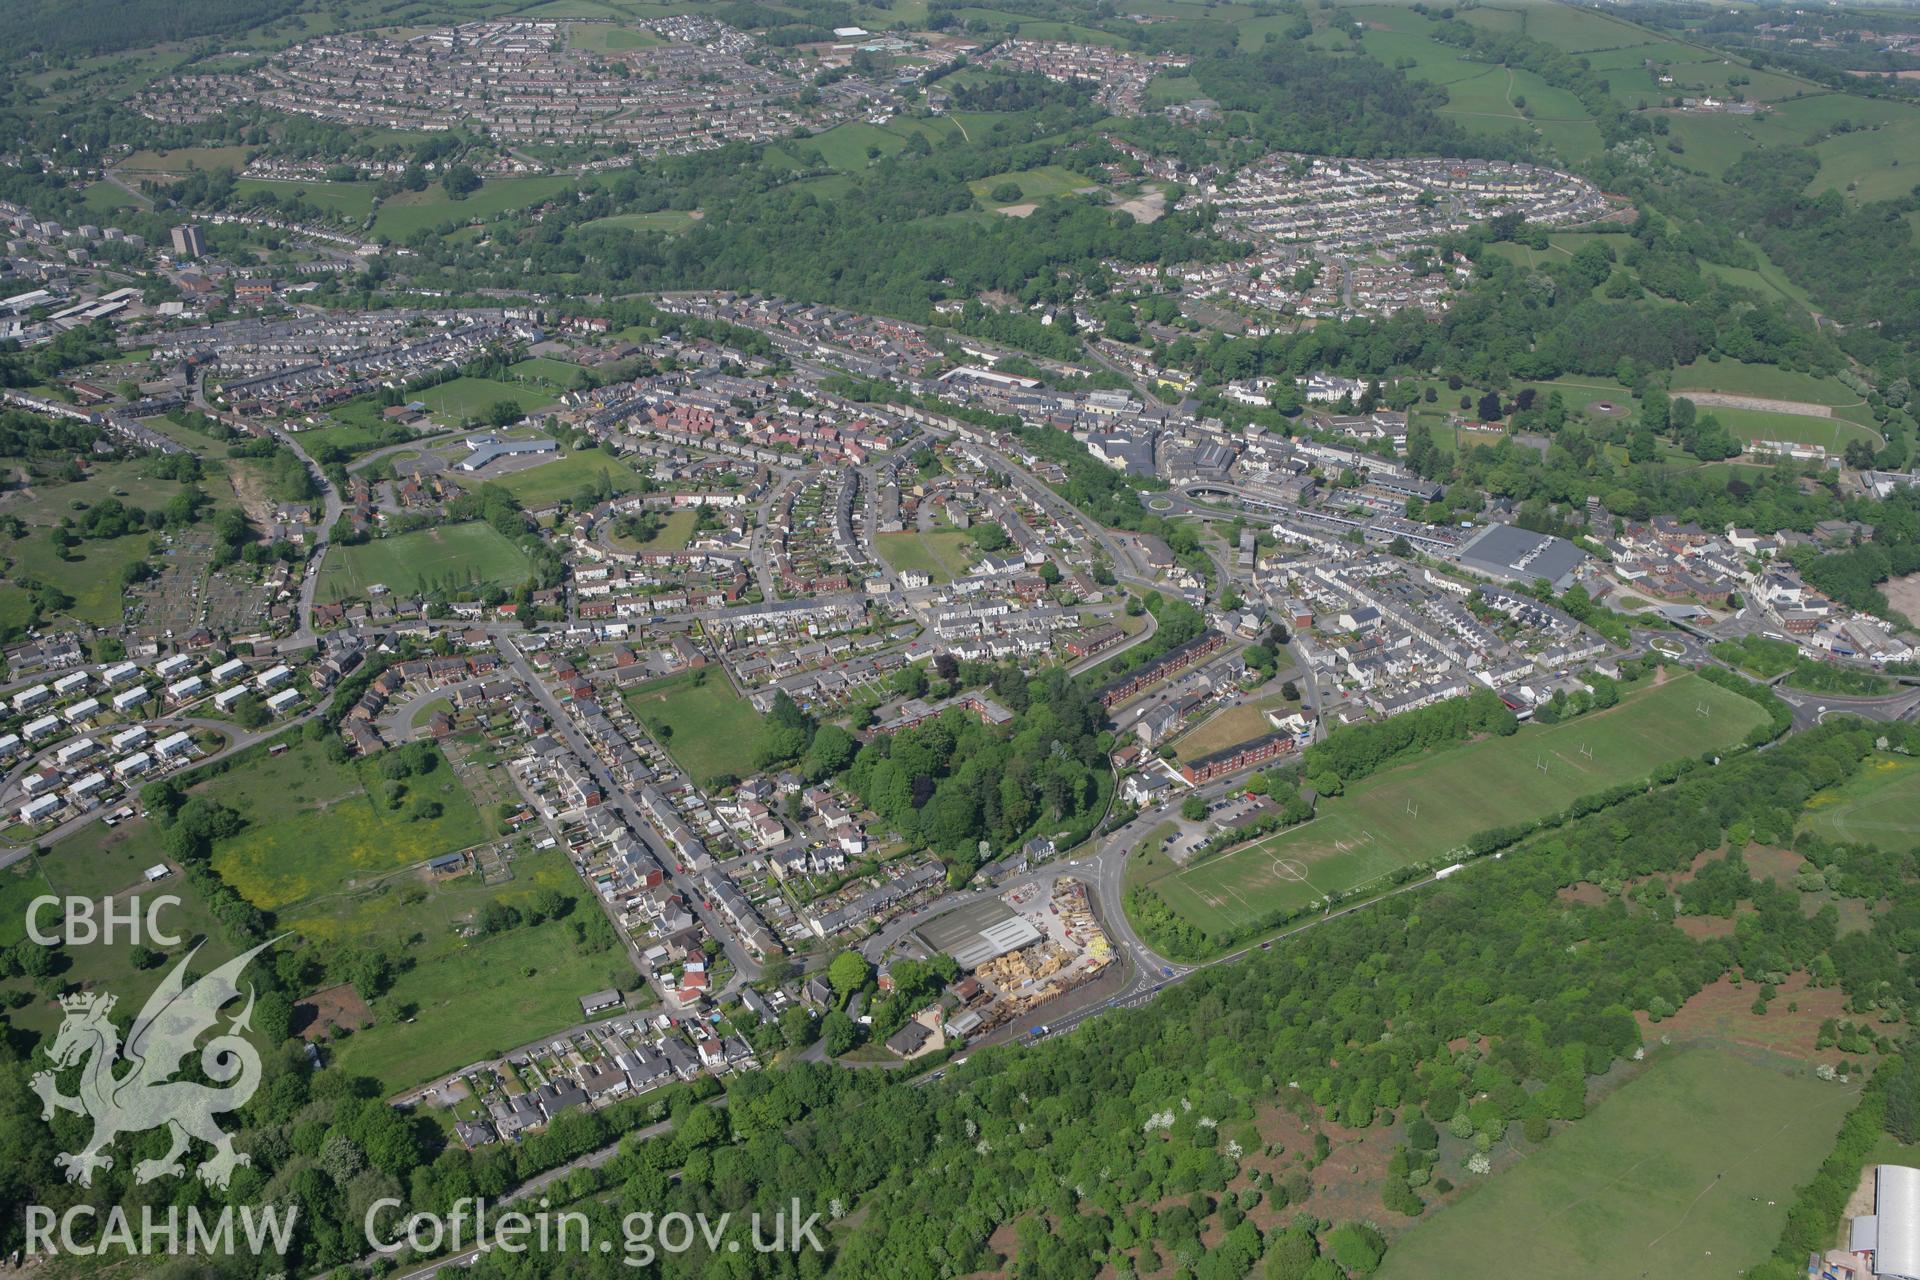 RCAHMW colour oblique photograph of Pontypool, view from the south. Taken by Toby Driver on 24/05/2010.